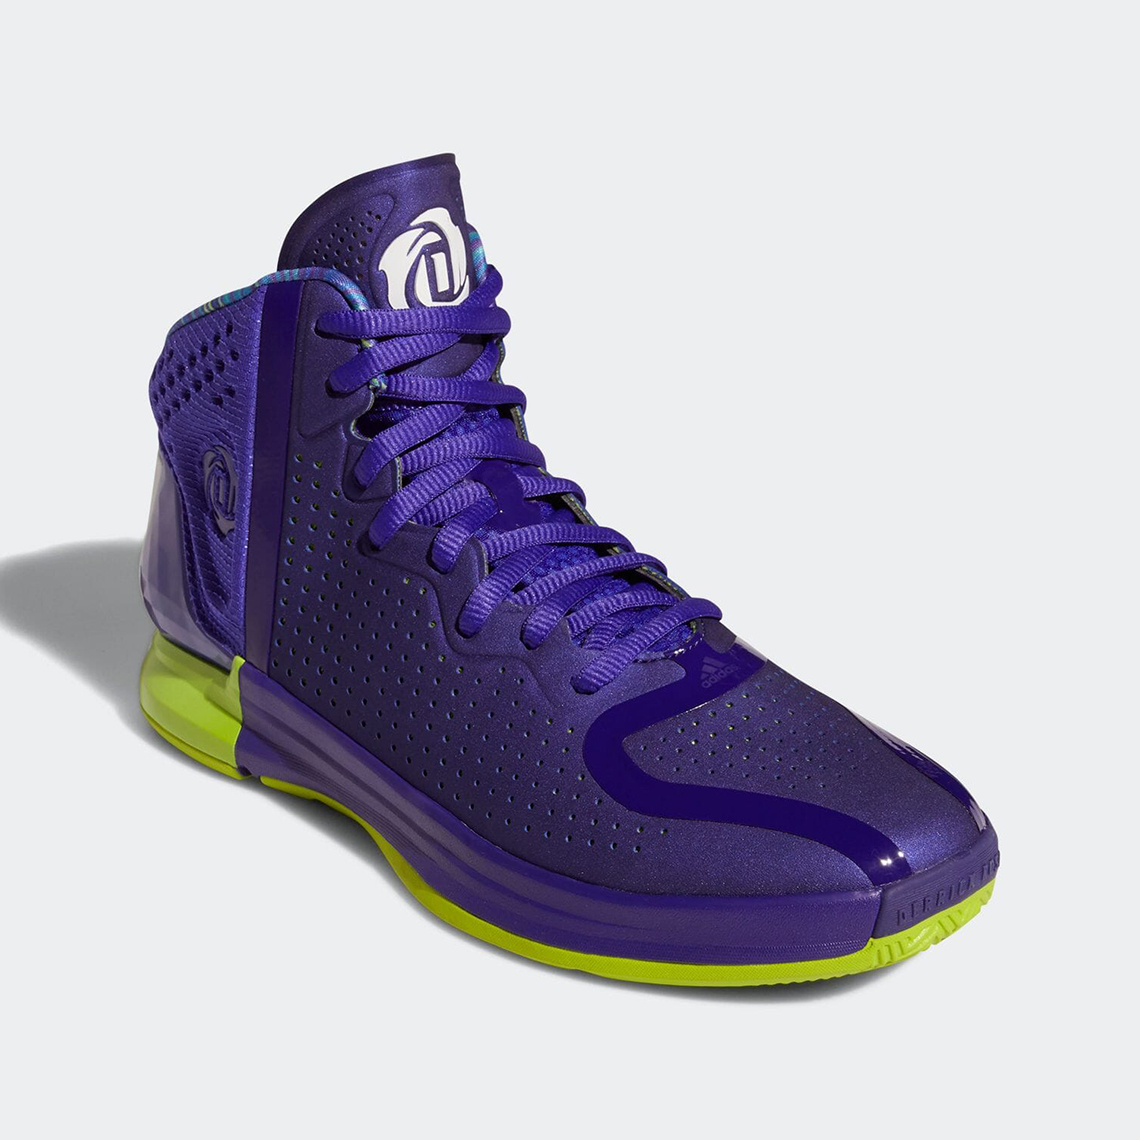 Adidas D Rose 4 Chicago Nightfall Release Date 2